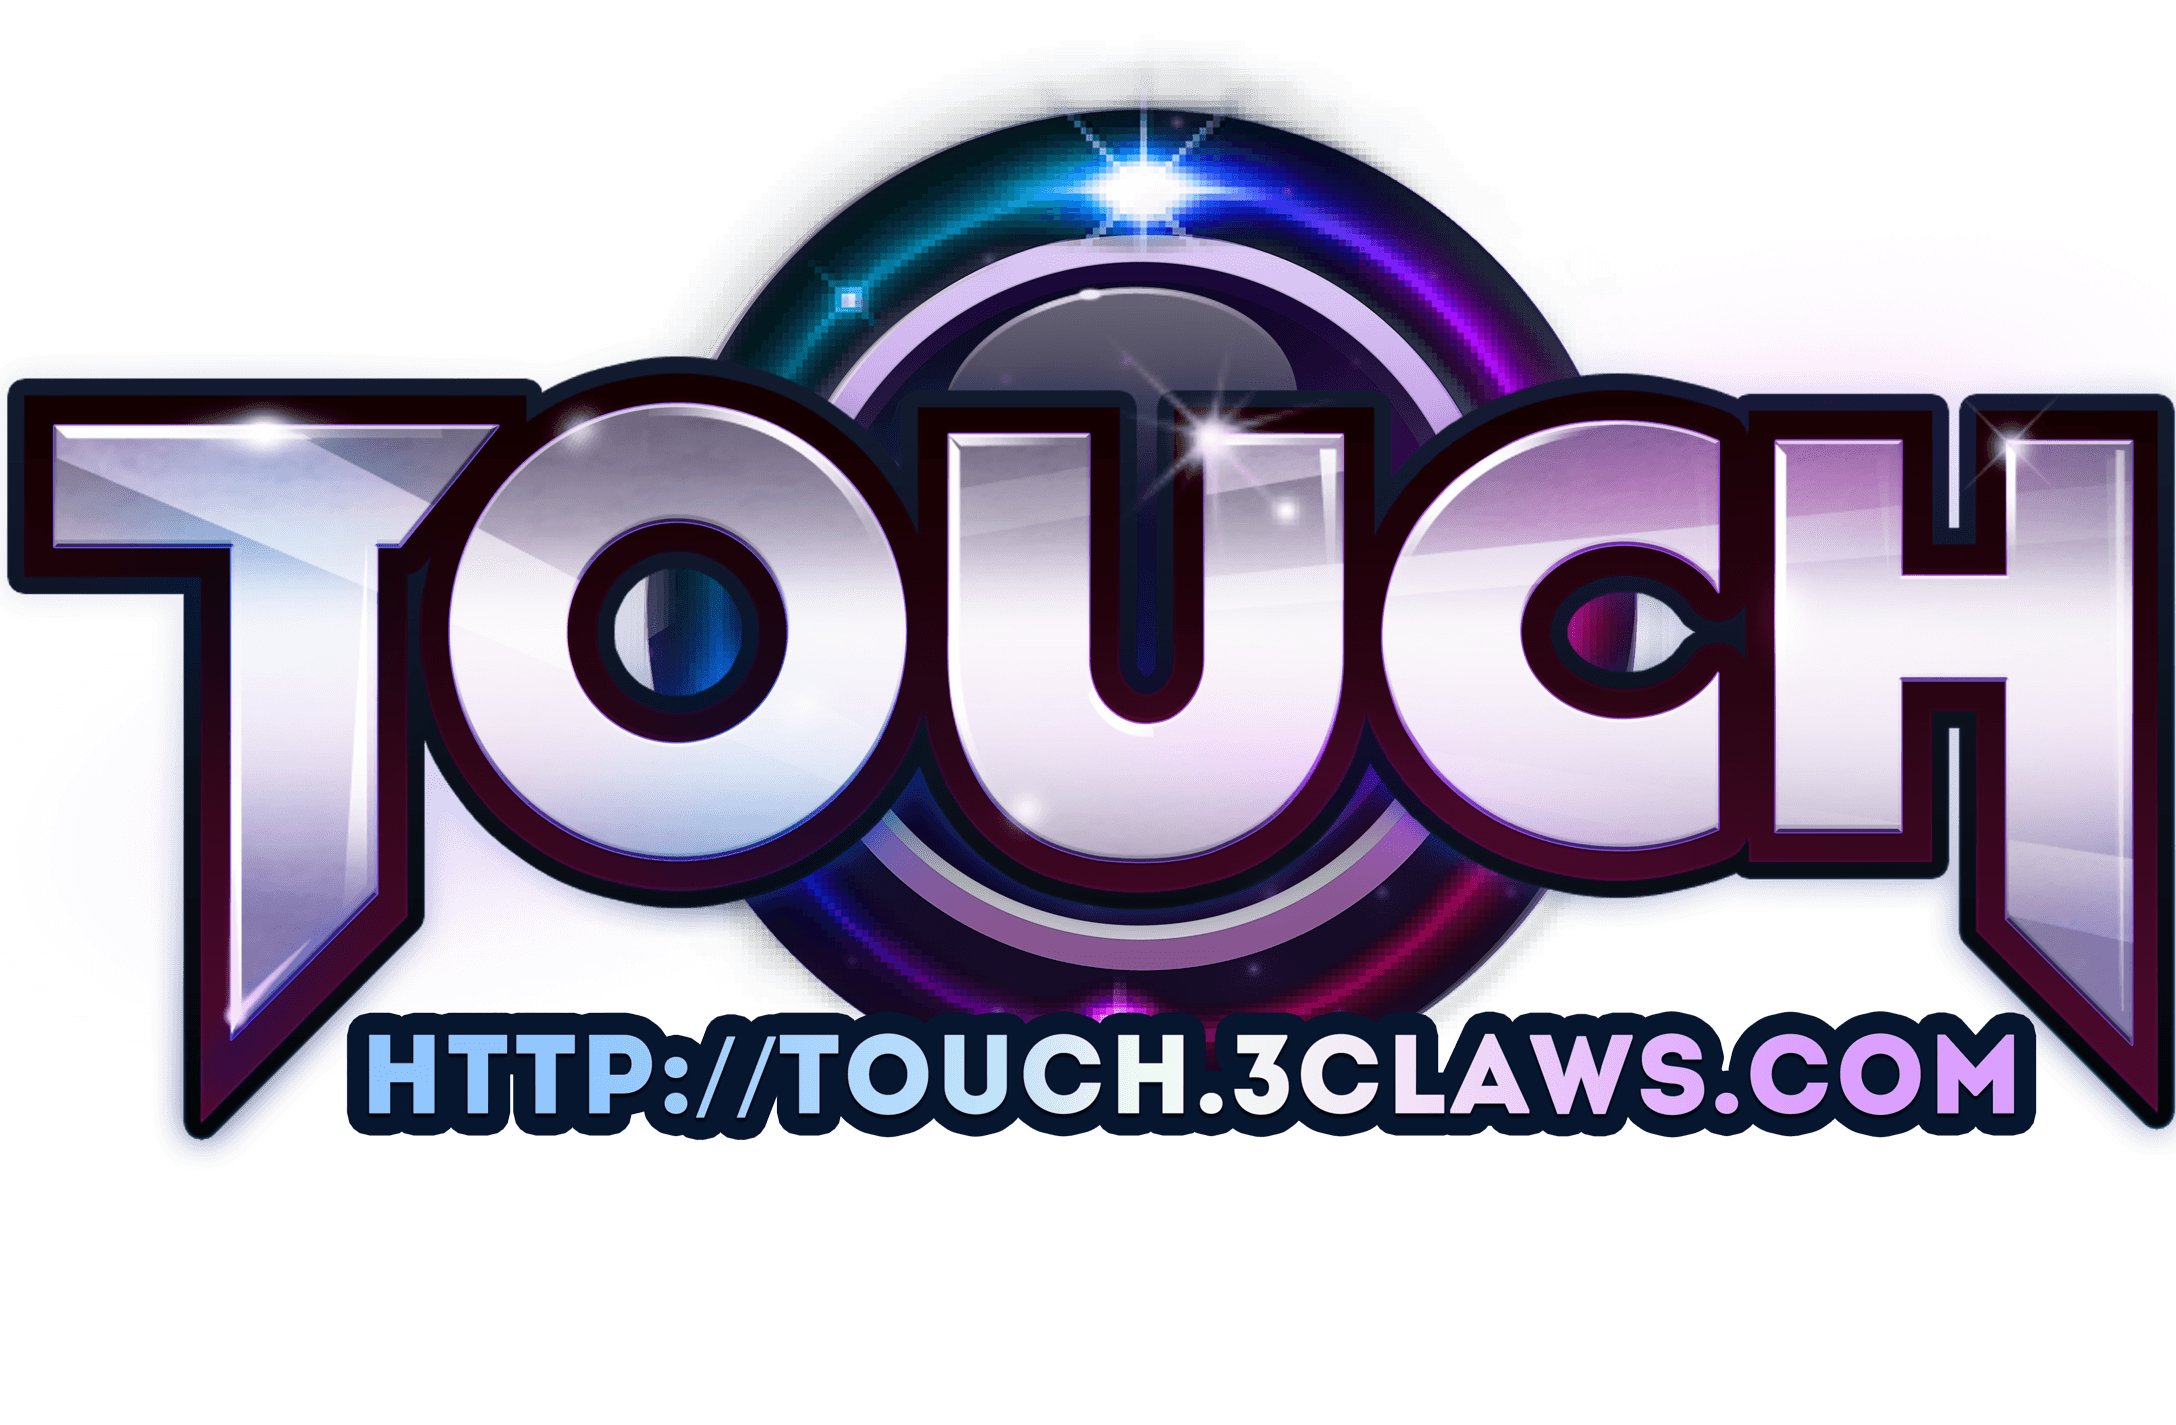 Touch Logo - TOUCH Logo BIG 3claws